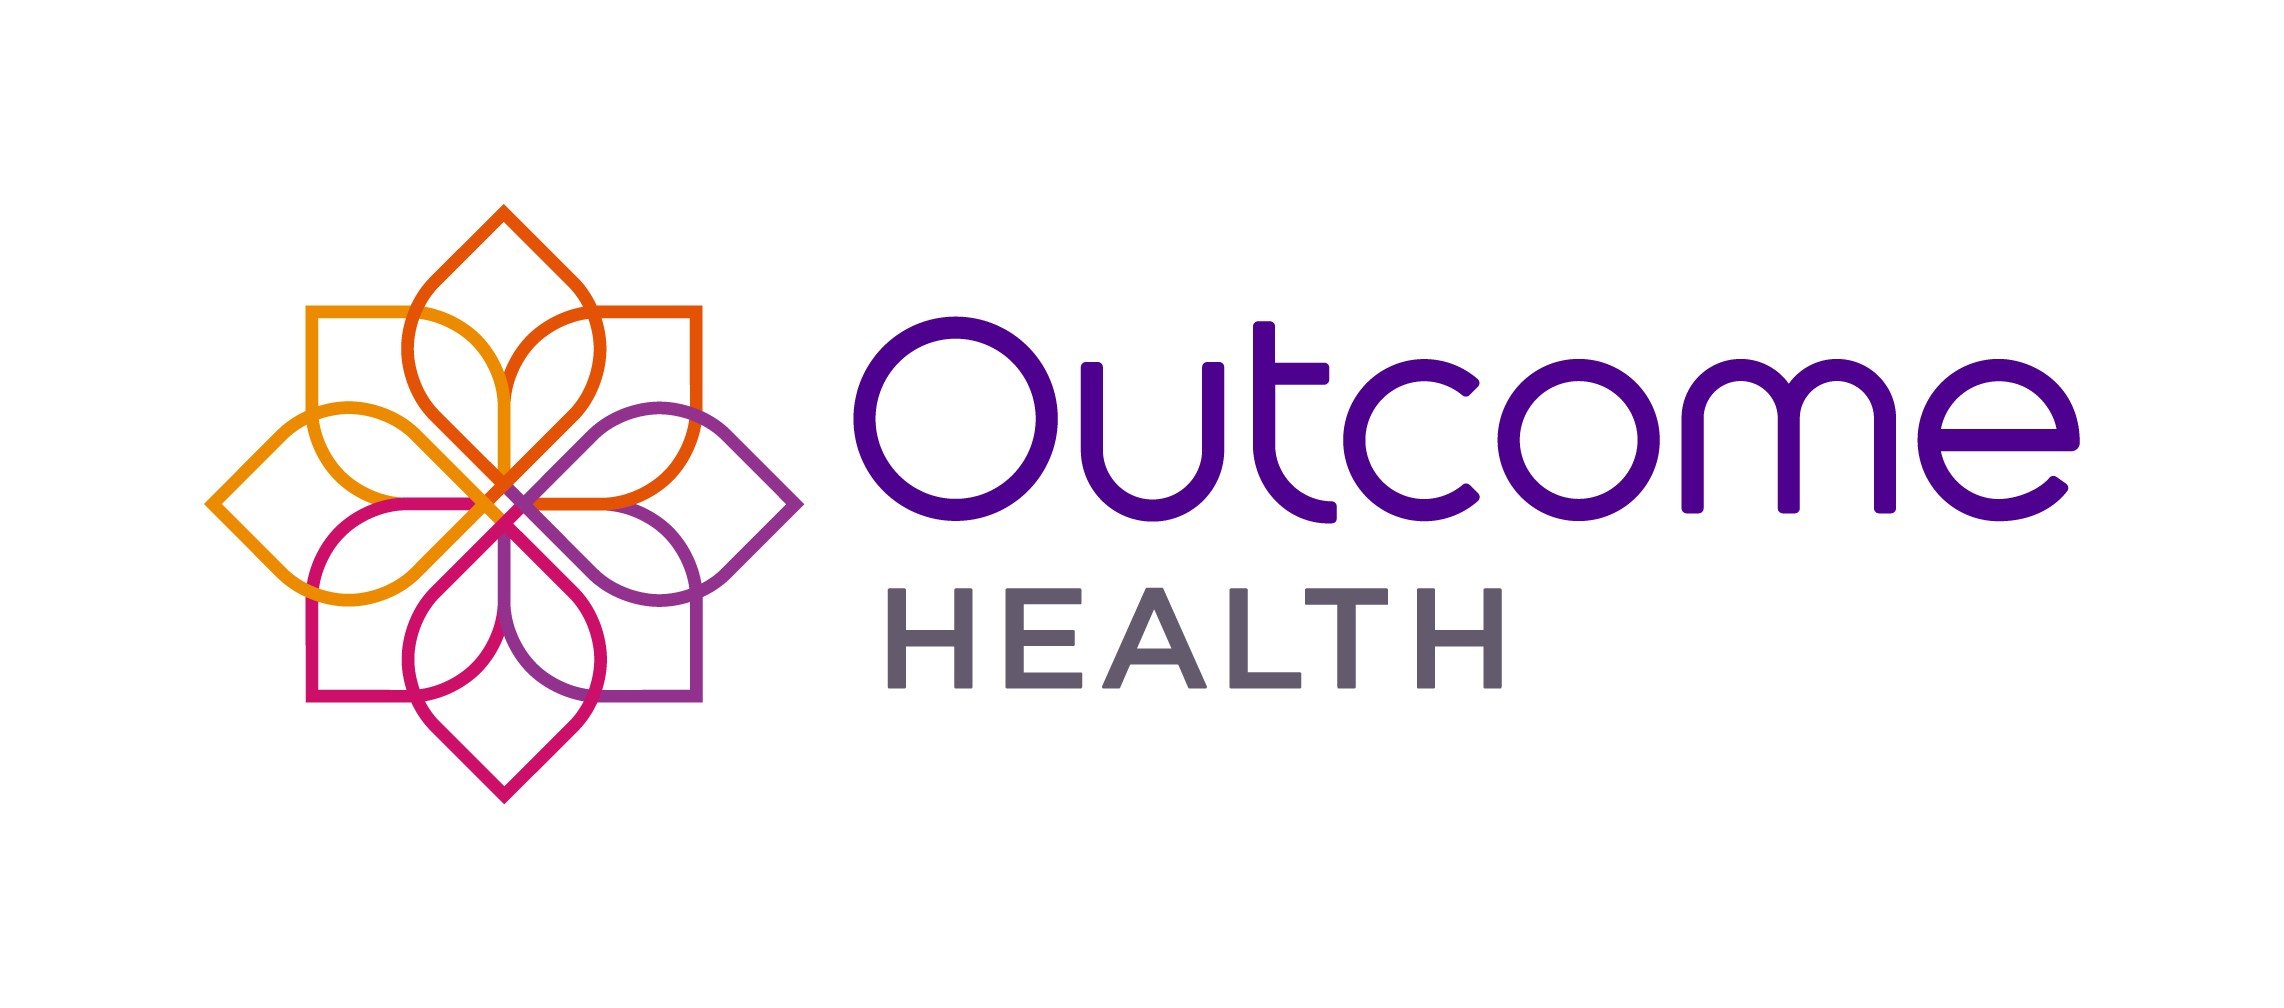 Outcome Health Announces New Content Strategy, Focused On Empathy And Education To Enhance The Patient Experience